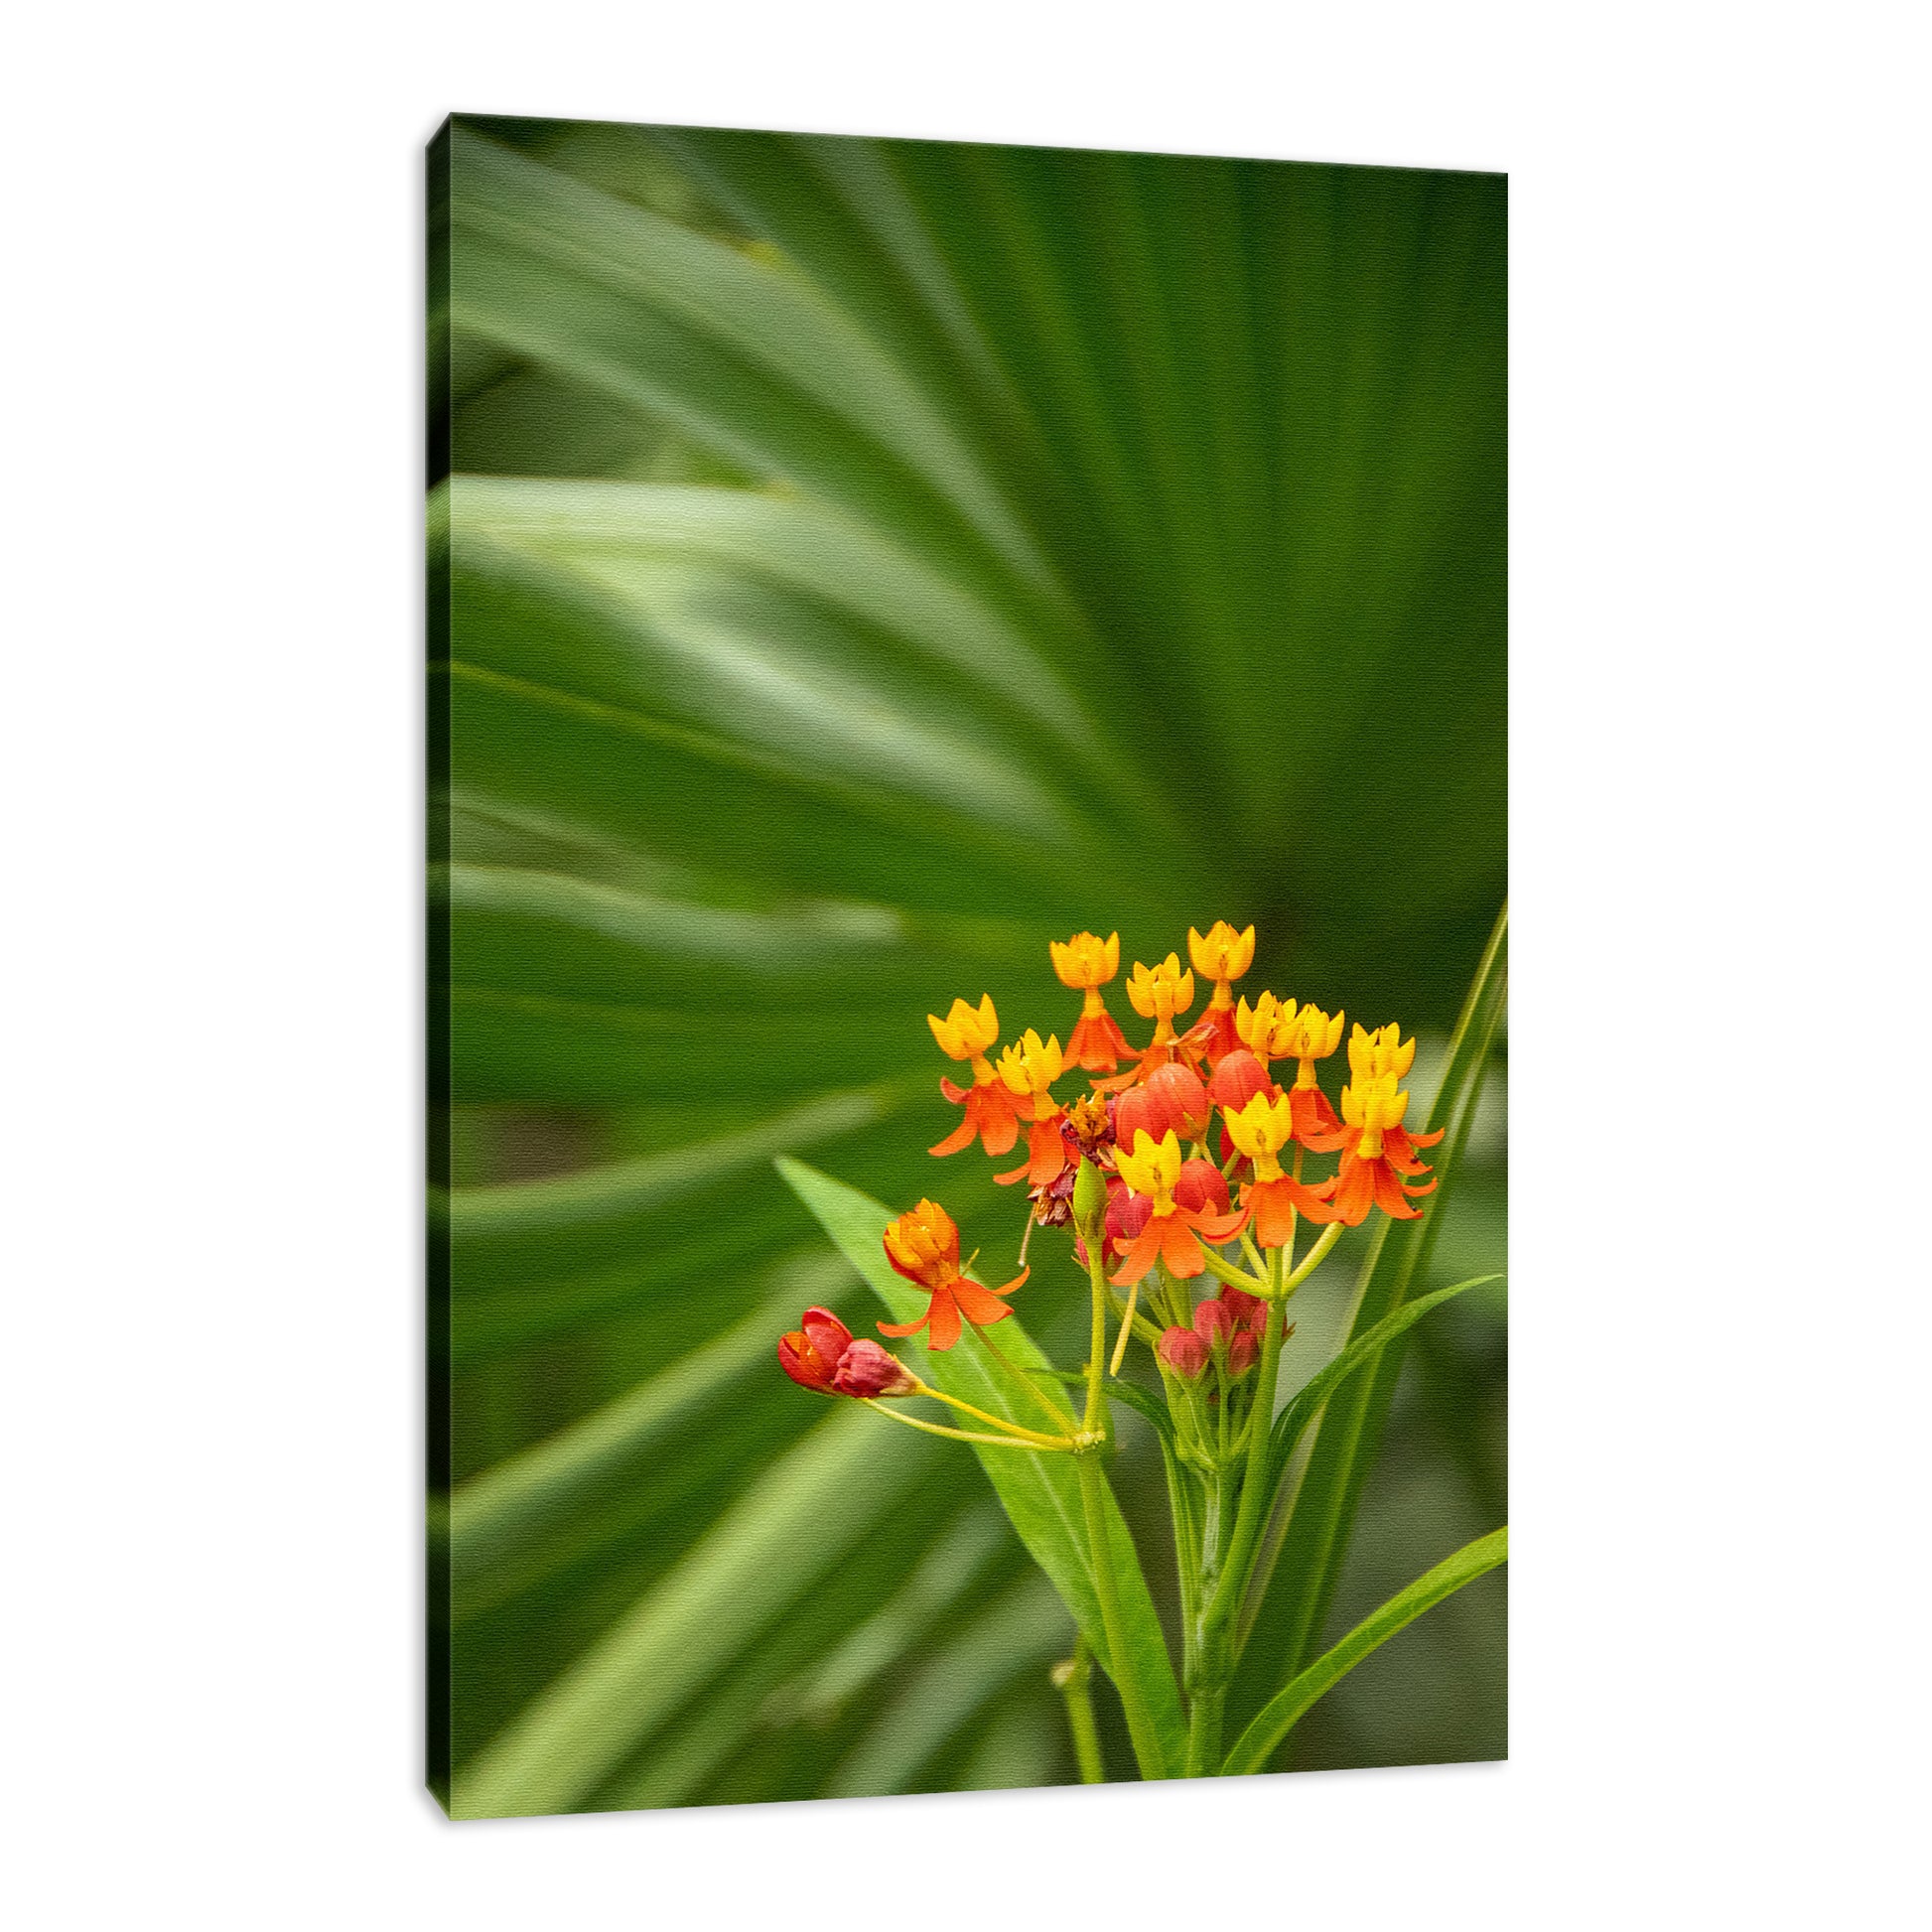 Bloodflowers & Palm Color Floral Nature Photo Fine Art Canvas Wall Art Prints  - PIPAFINEART